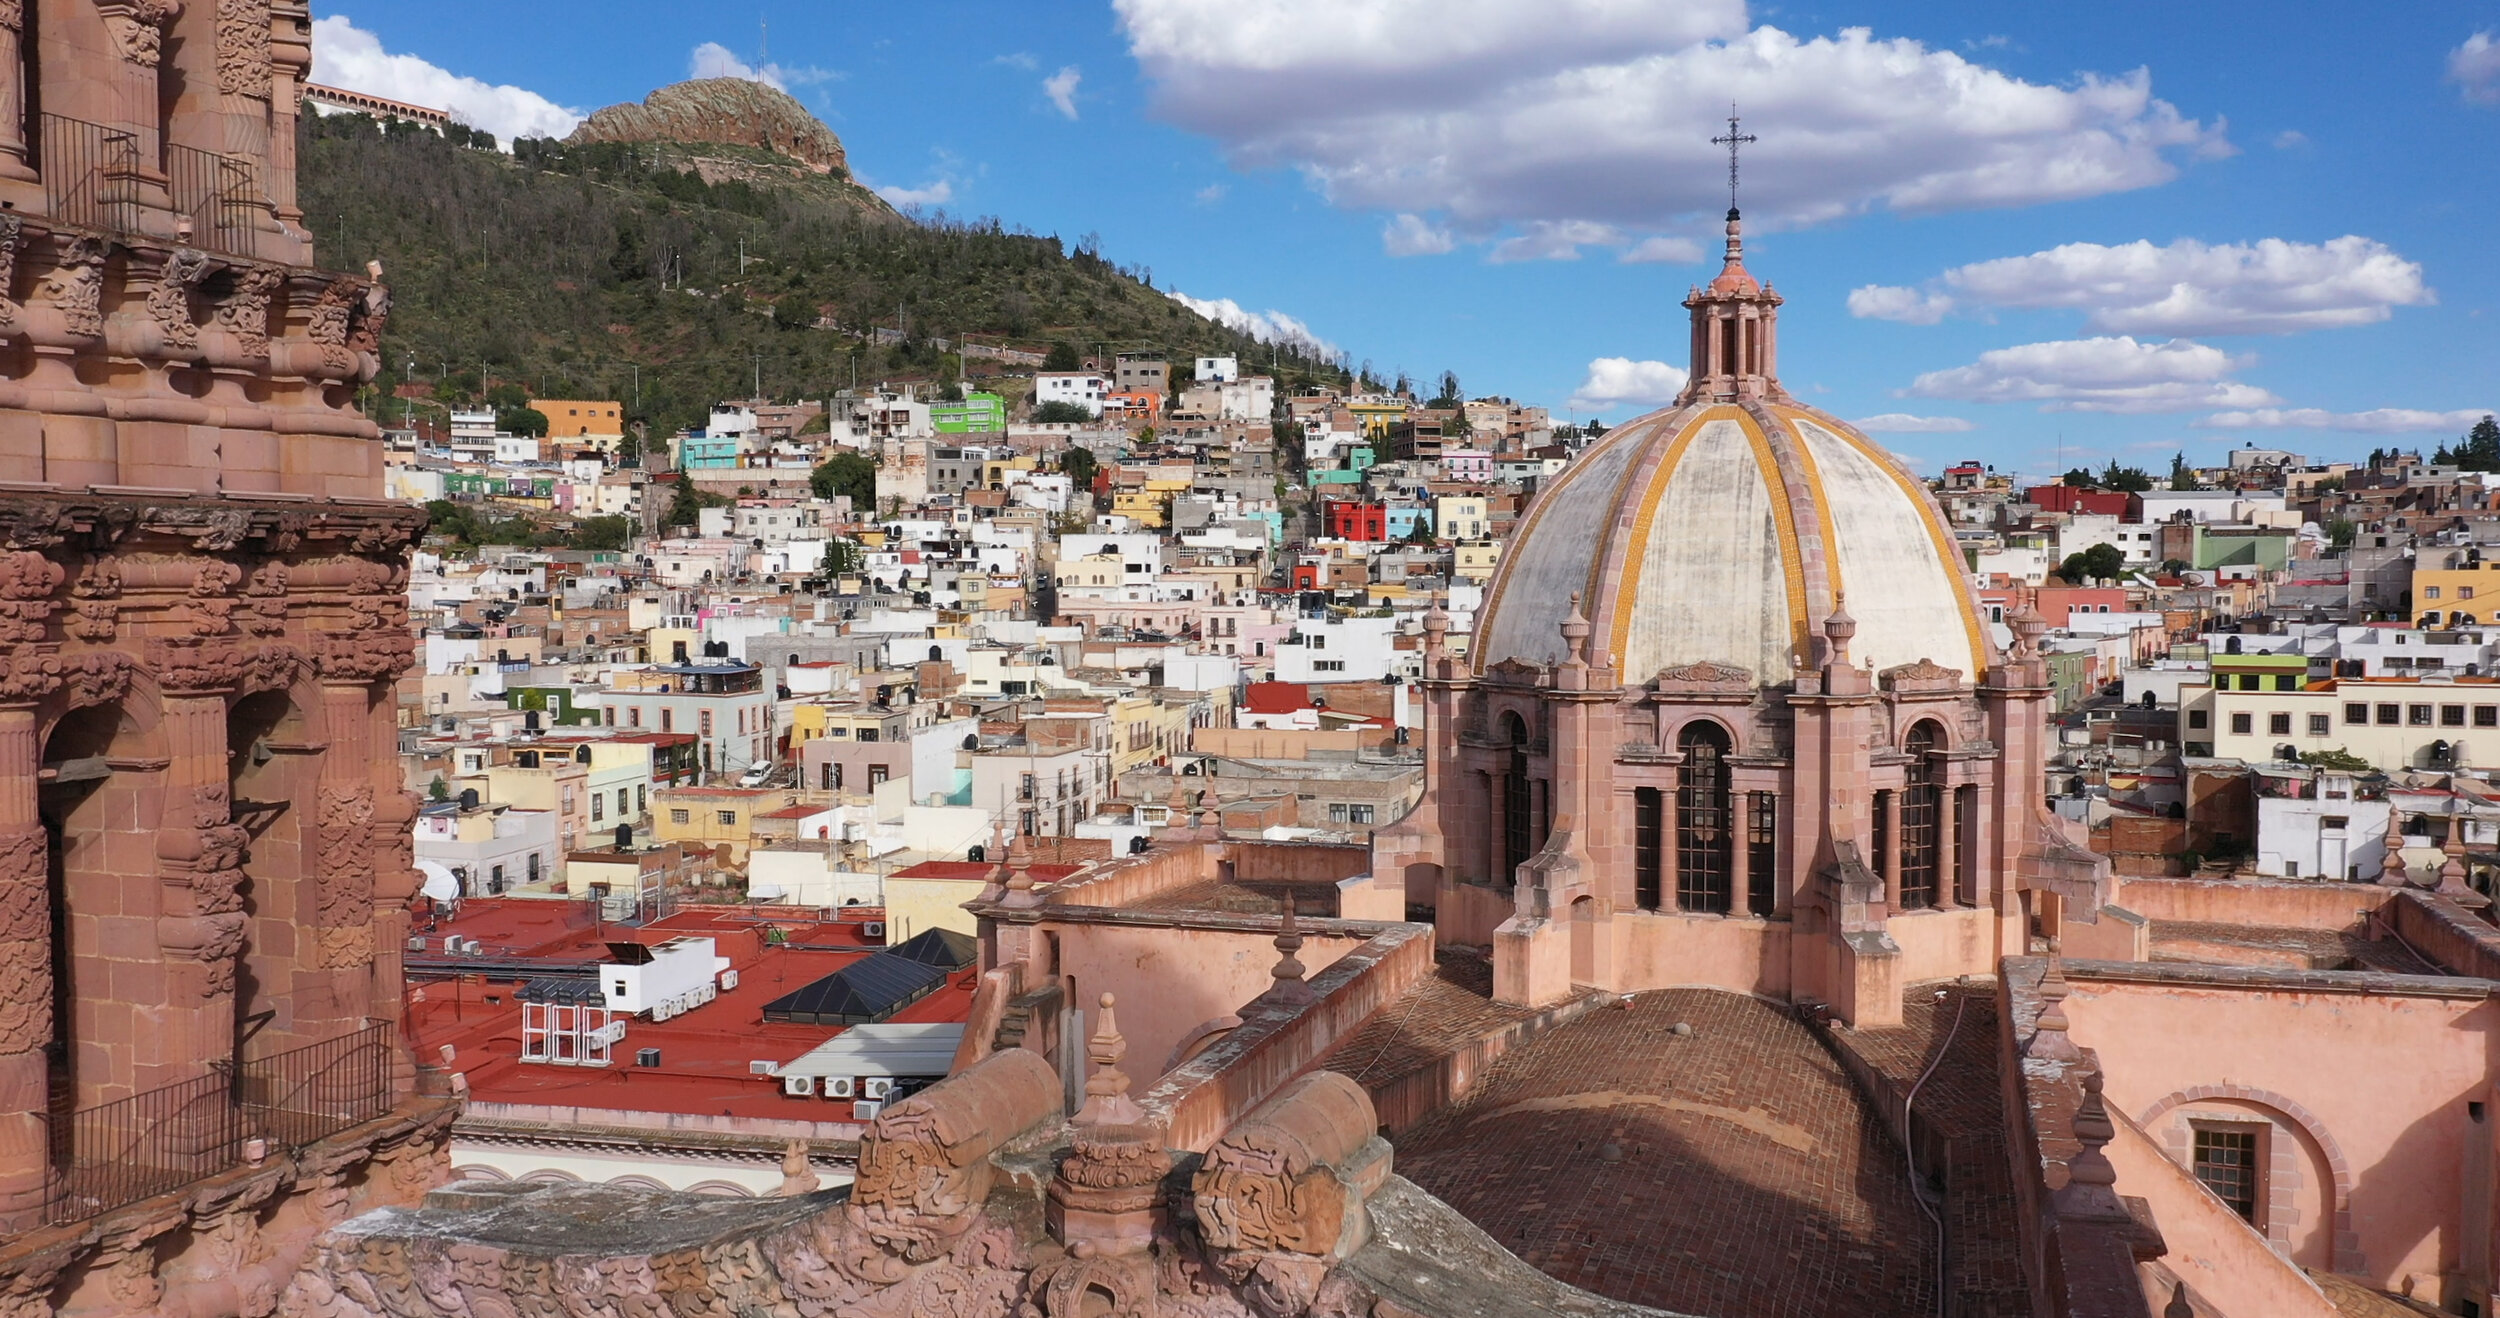 View of Zacatecas buildings and church.